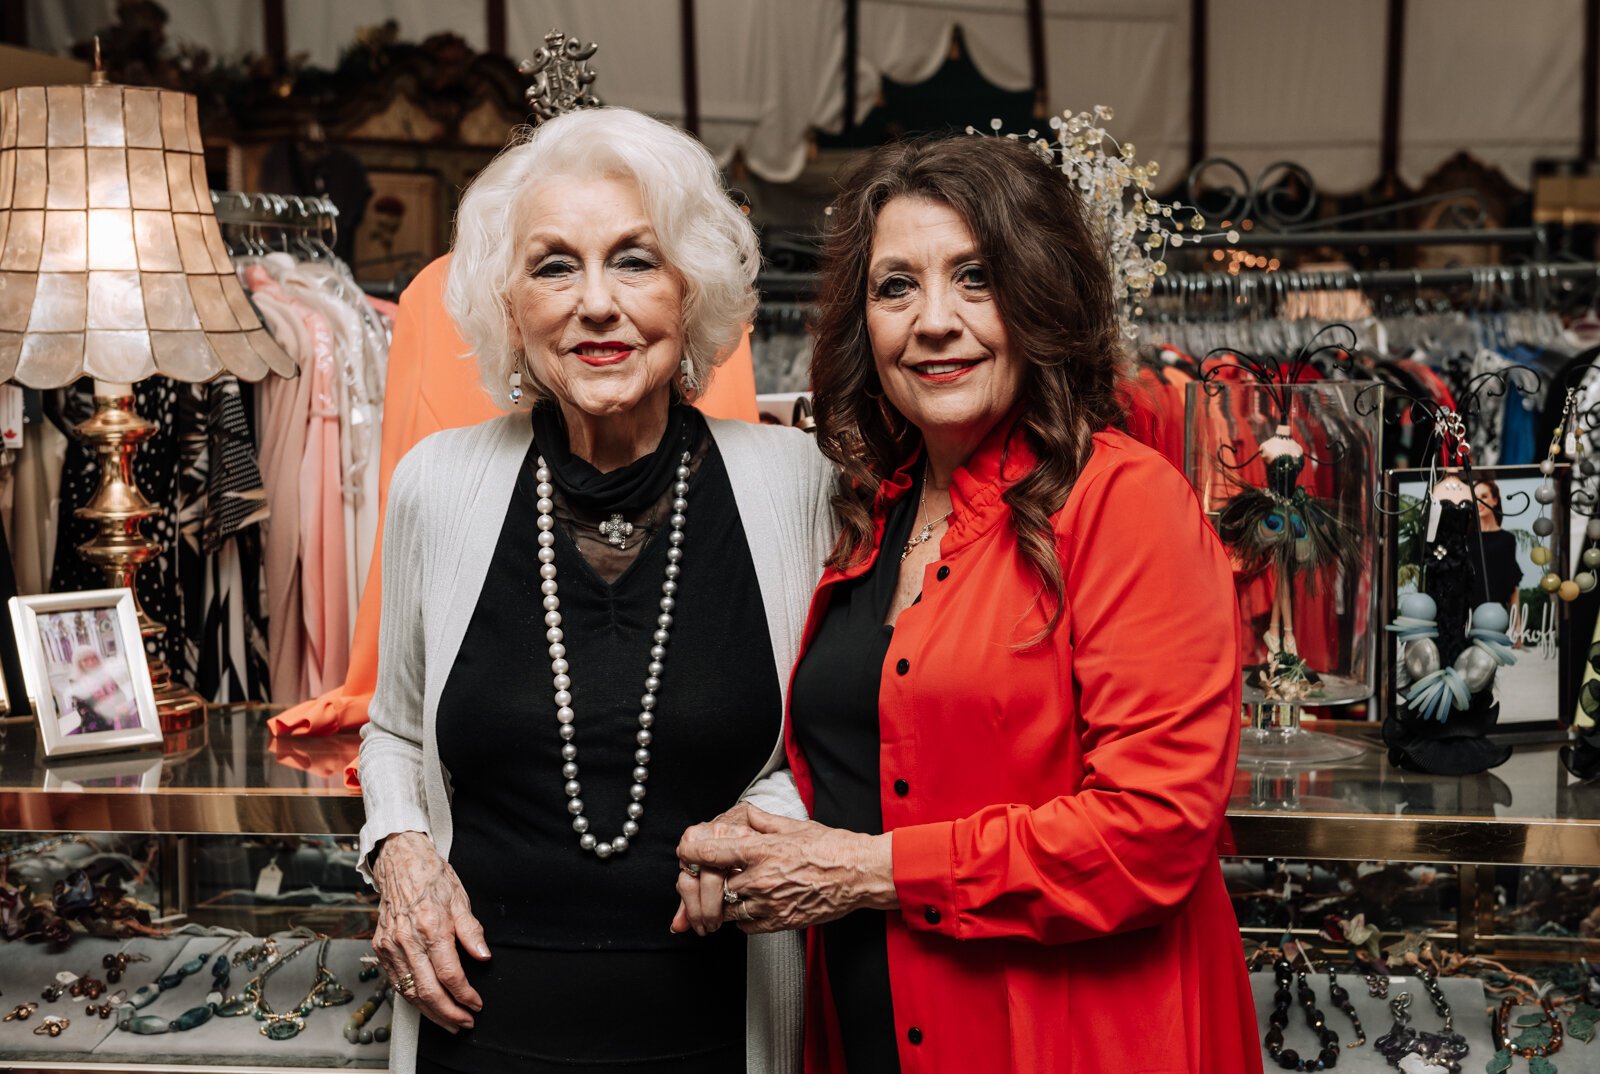 Portrait of co-owners Terri Francis-Alfed, right, and mother Marjorie Francis at The Francis Shoppe, 65 West Market Wabash, IN. Marjorie opened the shoppe in 1961.